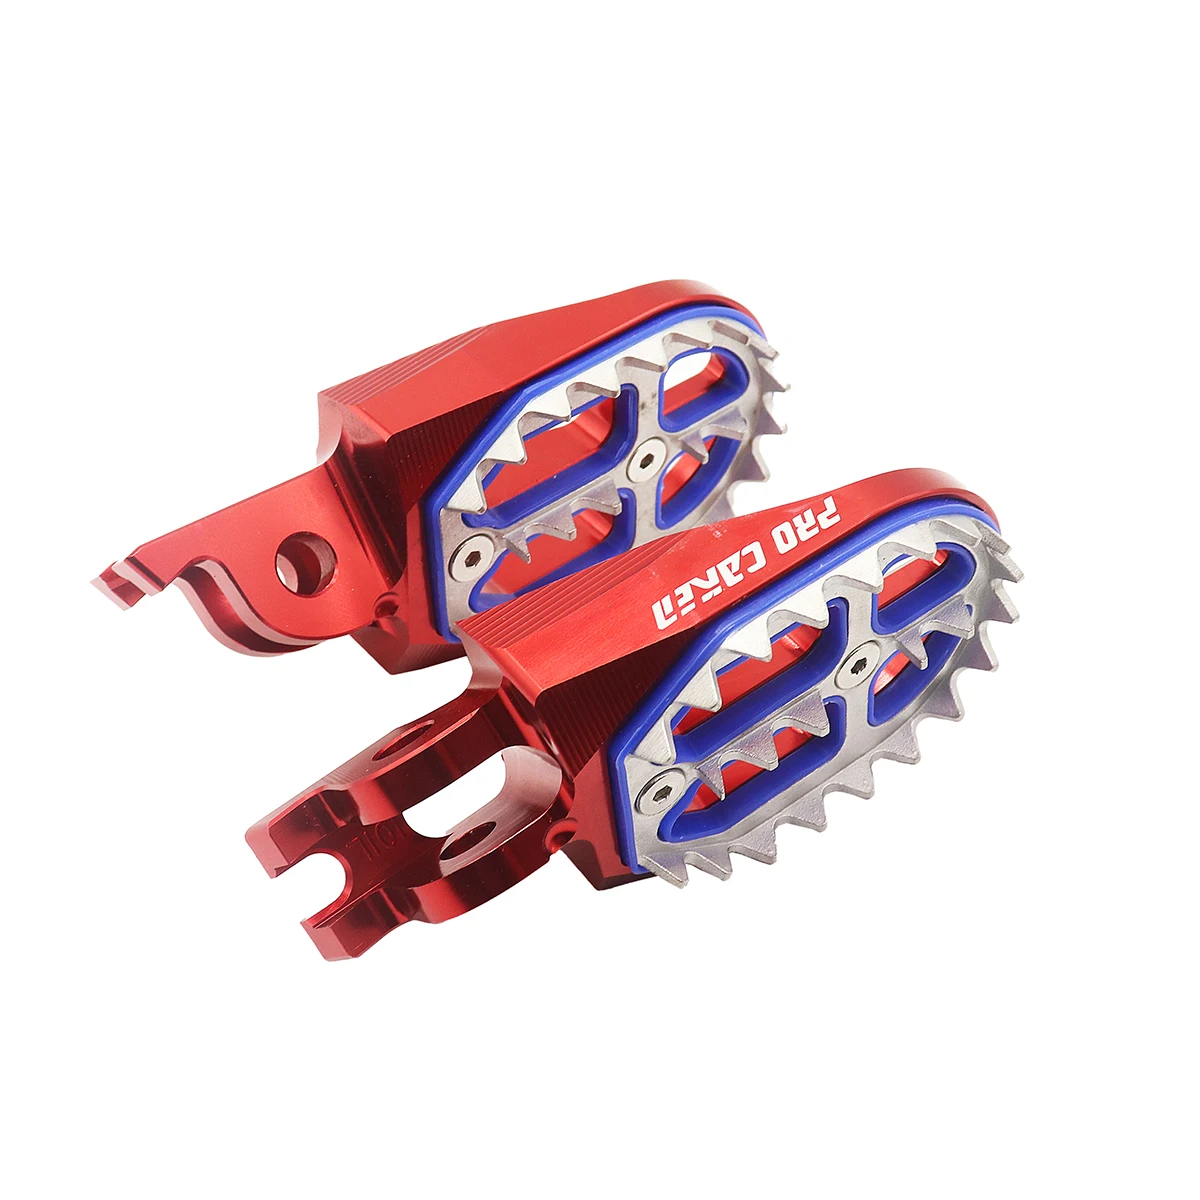 

Red CNC Billet MX Foot Pegs Rests Pedals Footpegs Fit For Honda CRF450R CRF450 CRF250 CRF250x CR125/250 Motorcycle